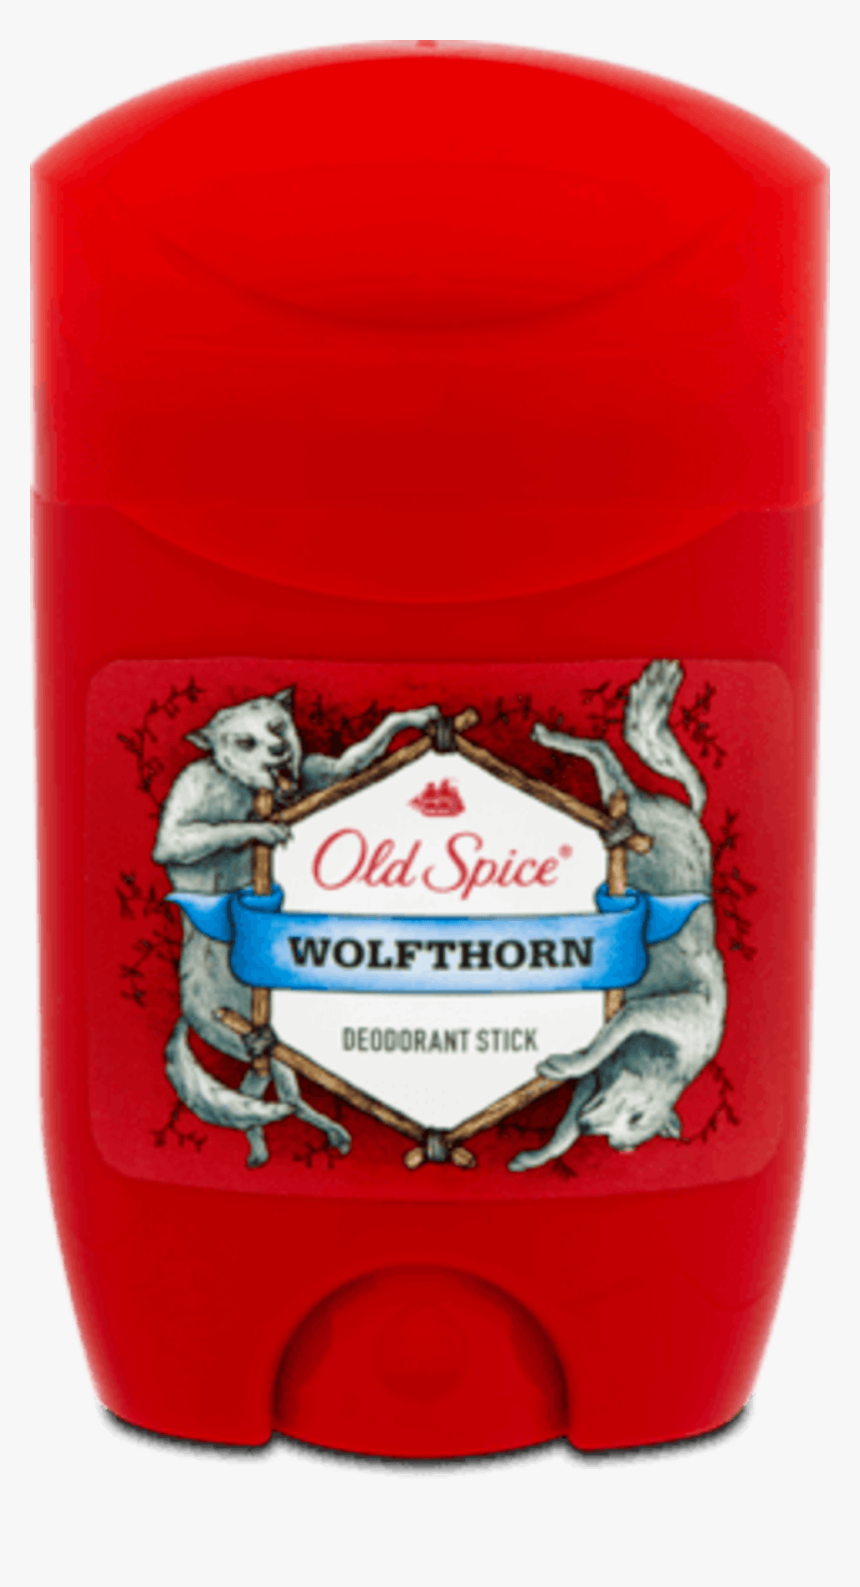 Old Spice Deodorant Stick Wolfthorn, 50 Ml On-line - Deodorant Old Spice Stick Wolfthorn, HD Png Download, Free Download